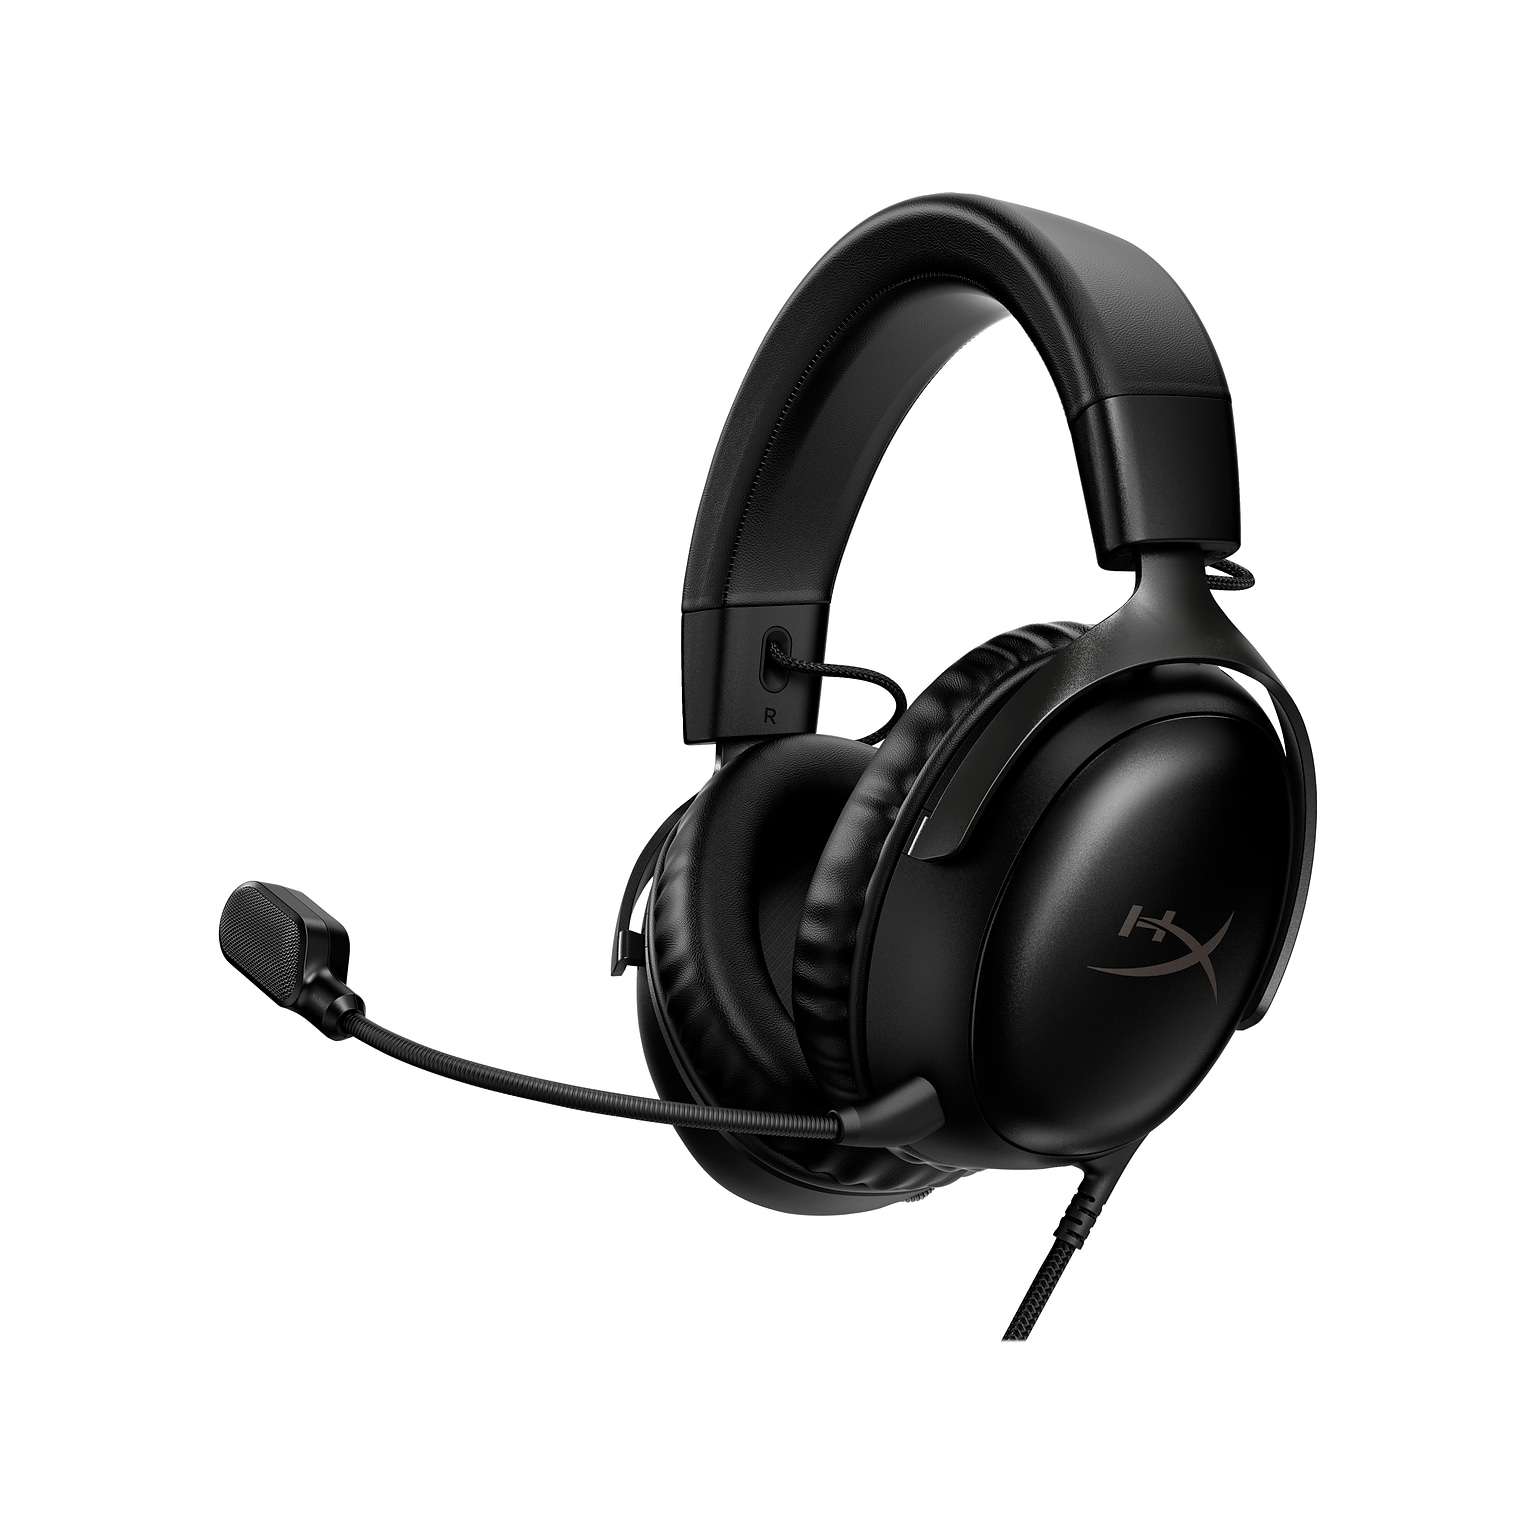 HyperX Cloud III Noise Canceling Stereo Gaming Over-the-Ear Headset, USB/3.5mm, Black (727A8AA)